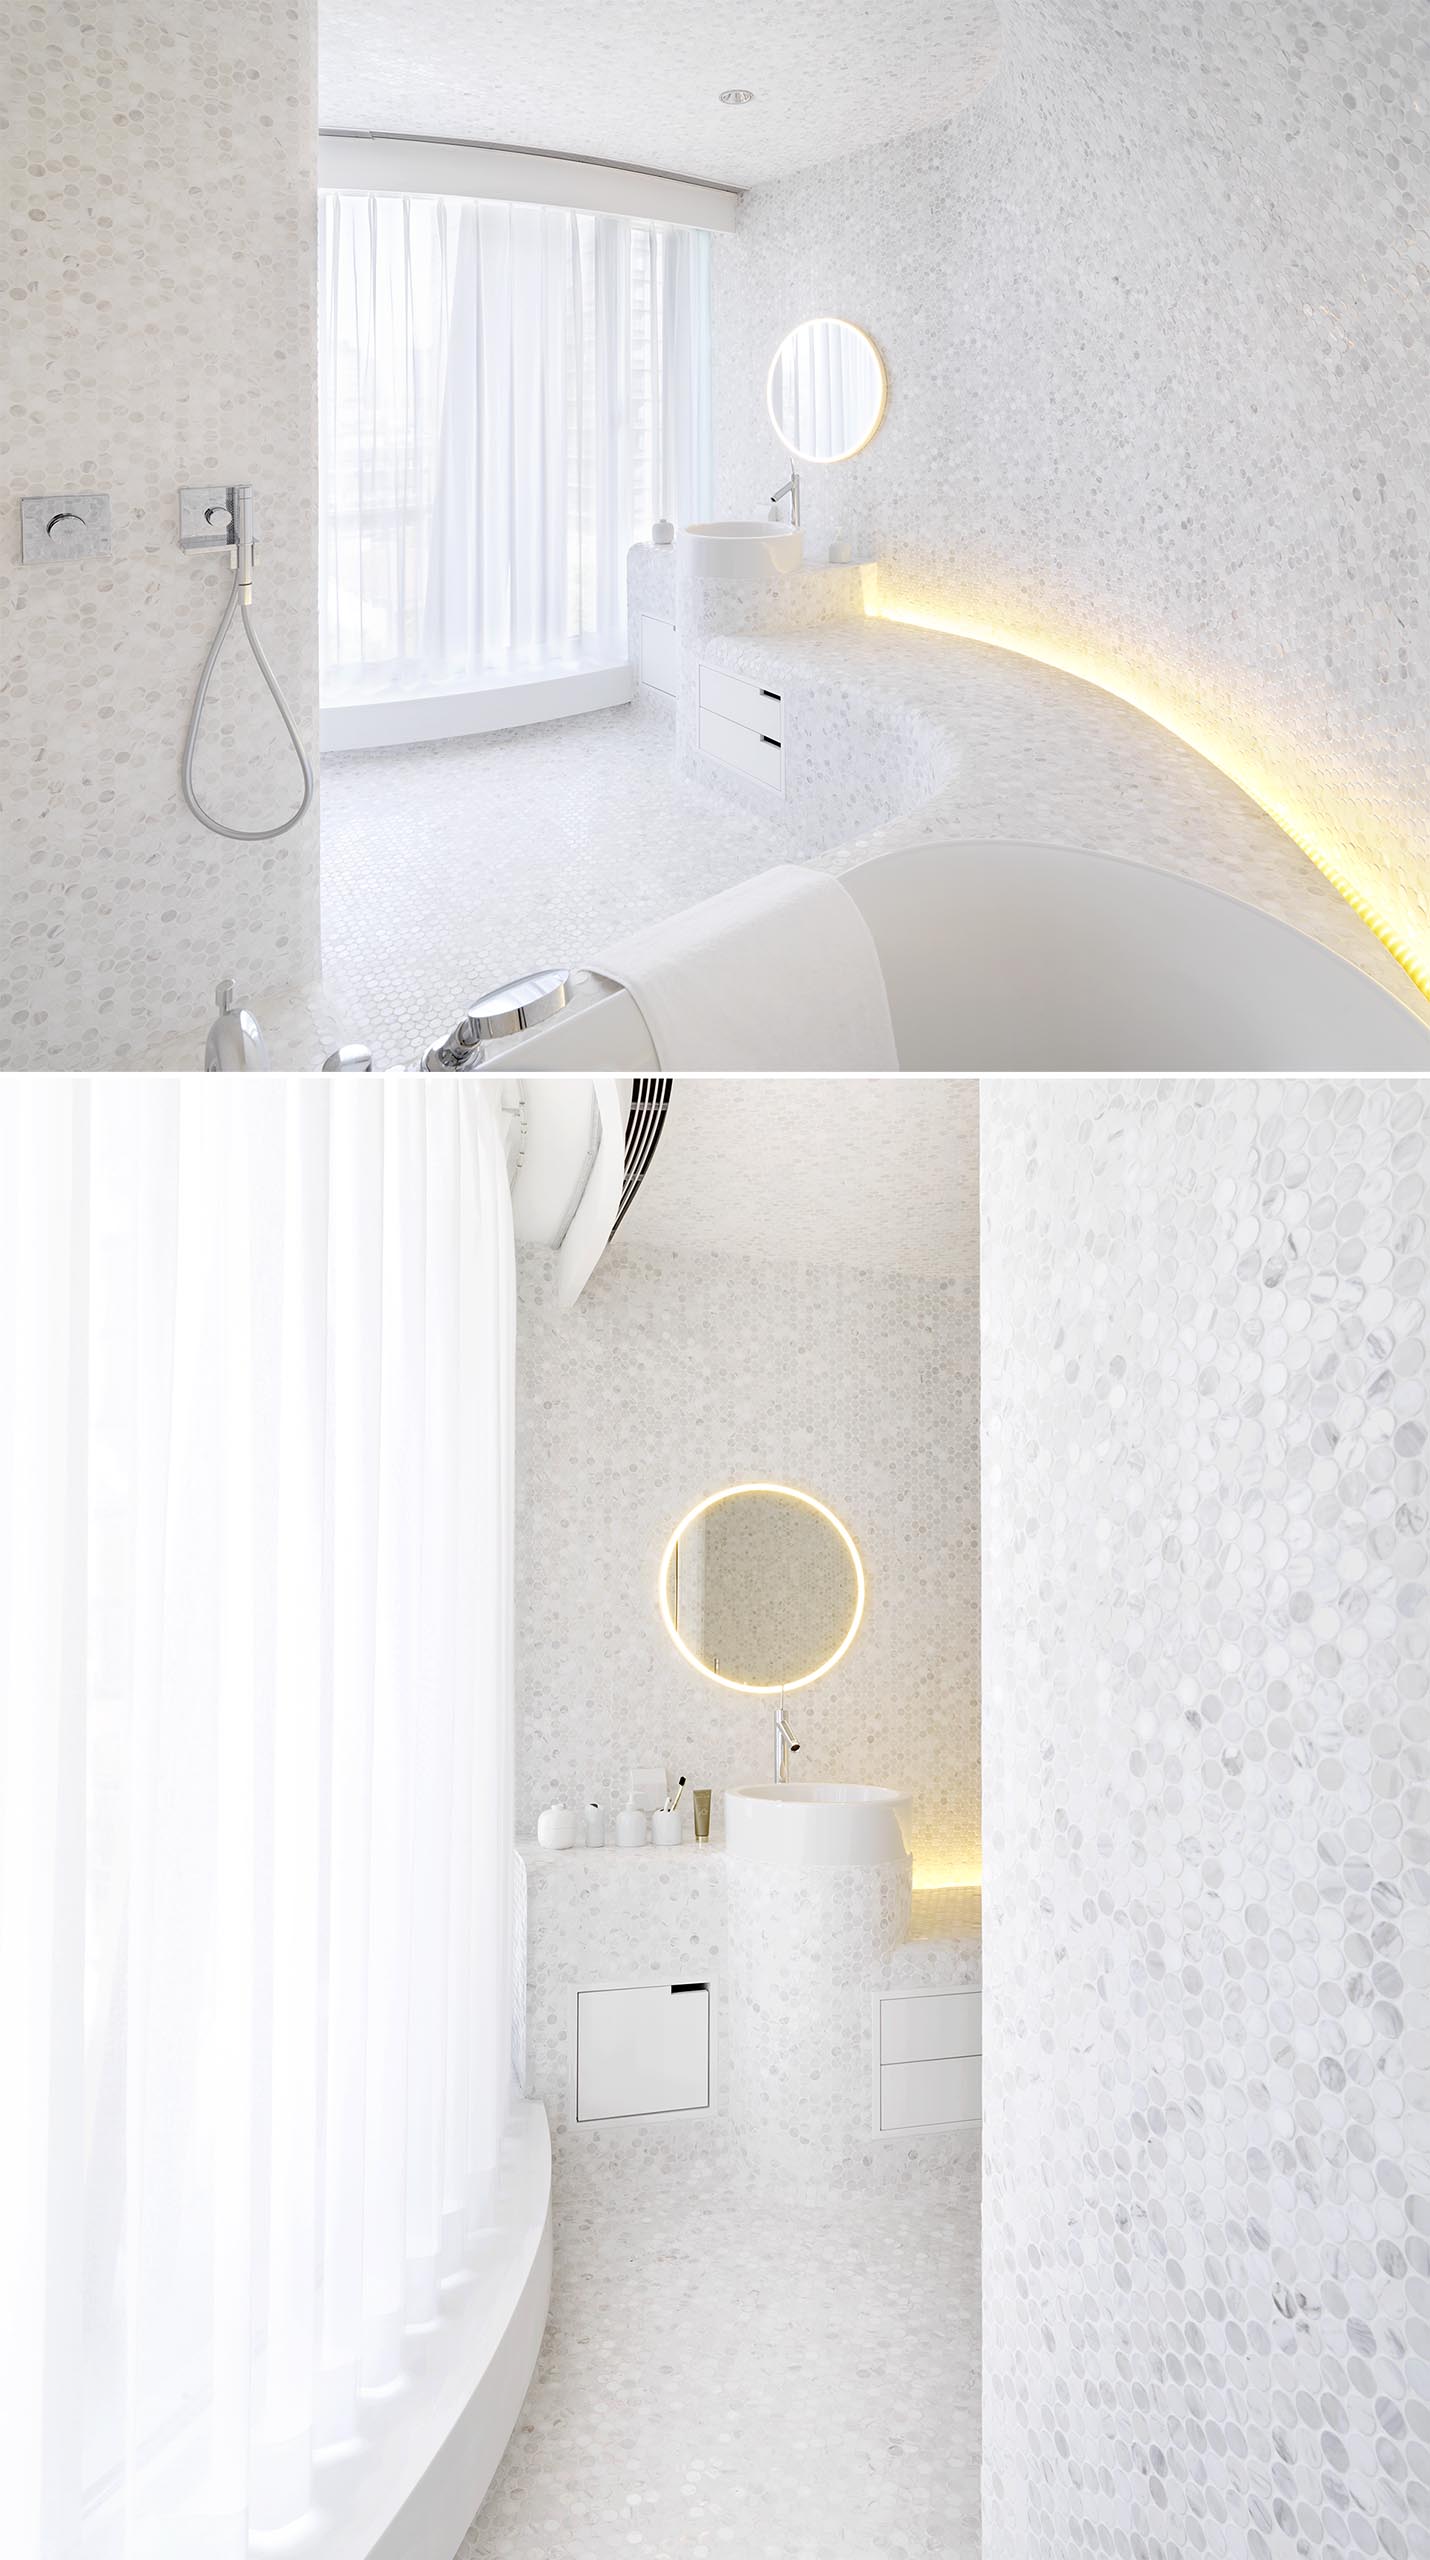 A modern white bathroom with penny tiles, hidden lighting, and curved built-in elements.